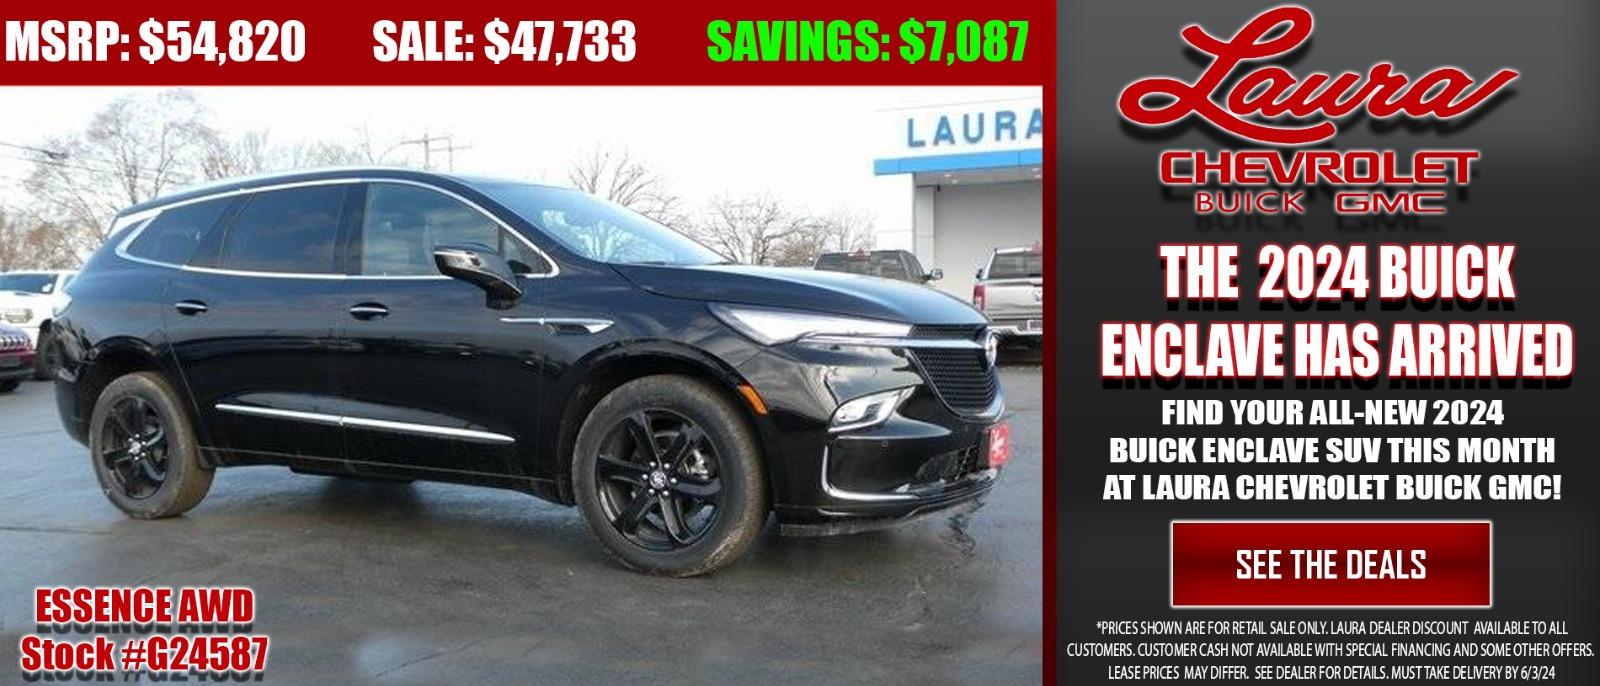 Save BIG on your new 2024 Buick Enclave SUV this month at Laura Chevrolet Buick GMC!